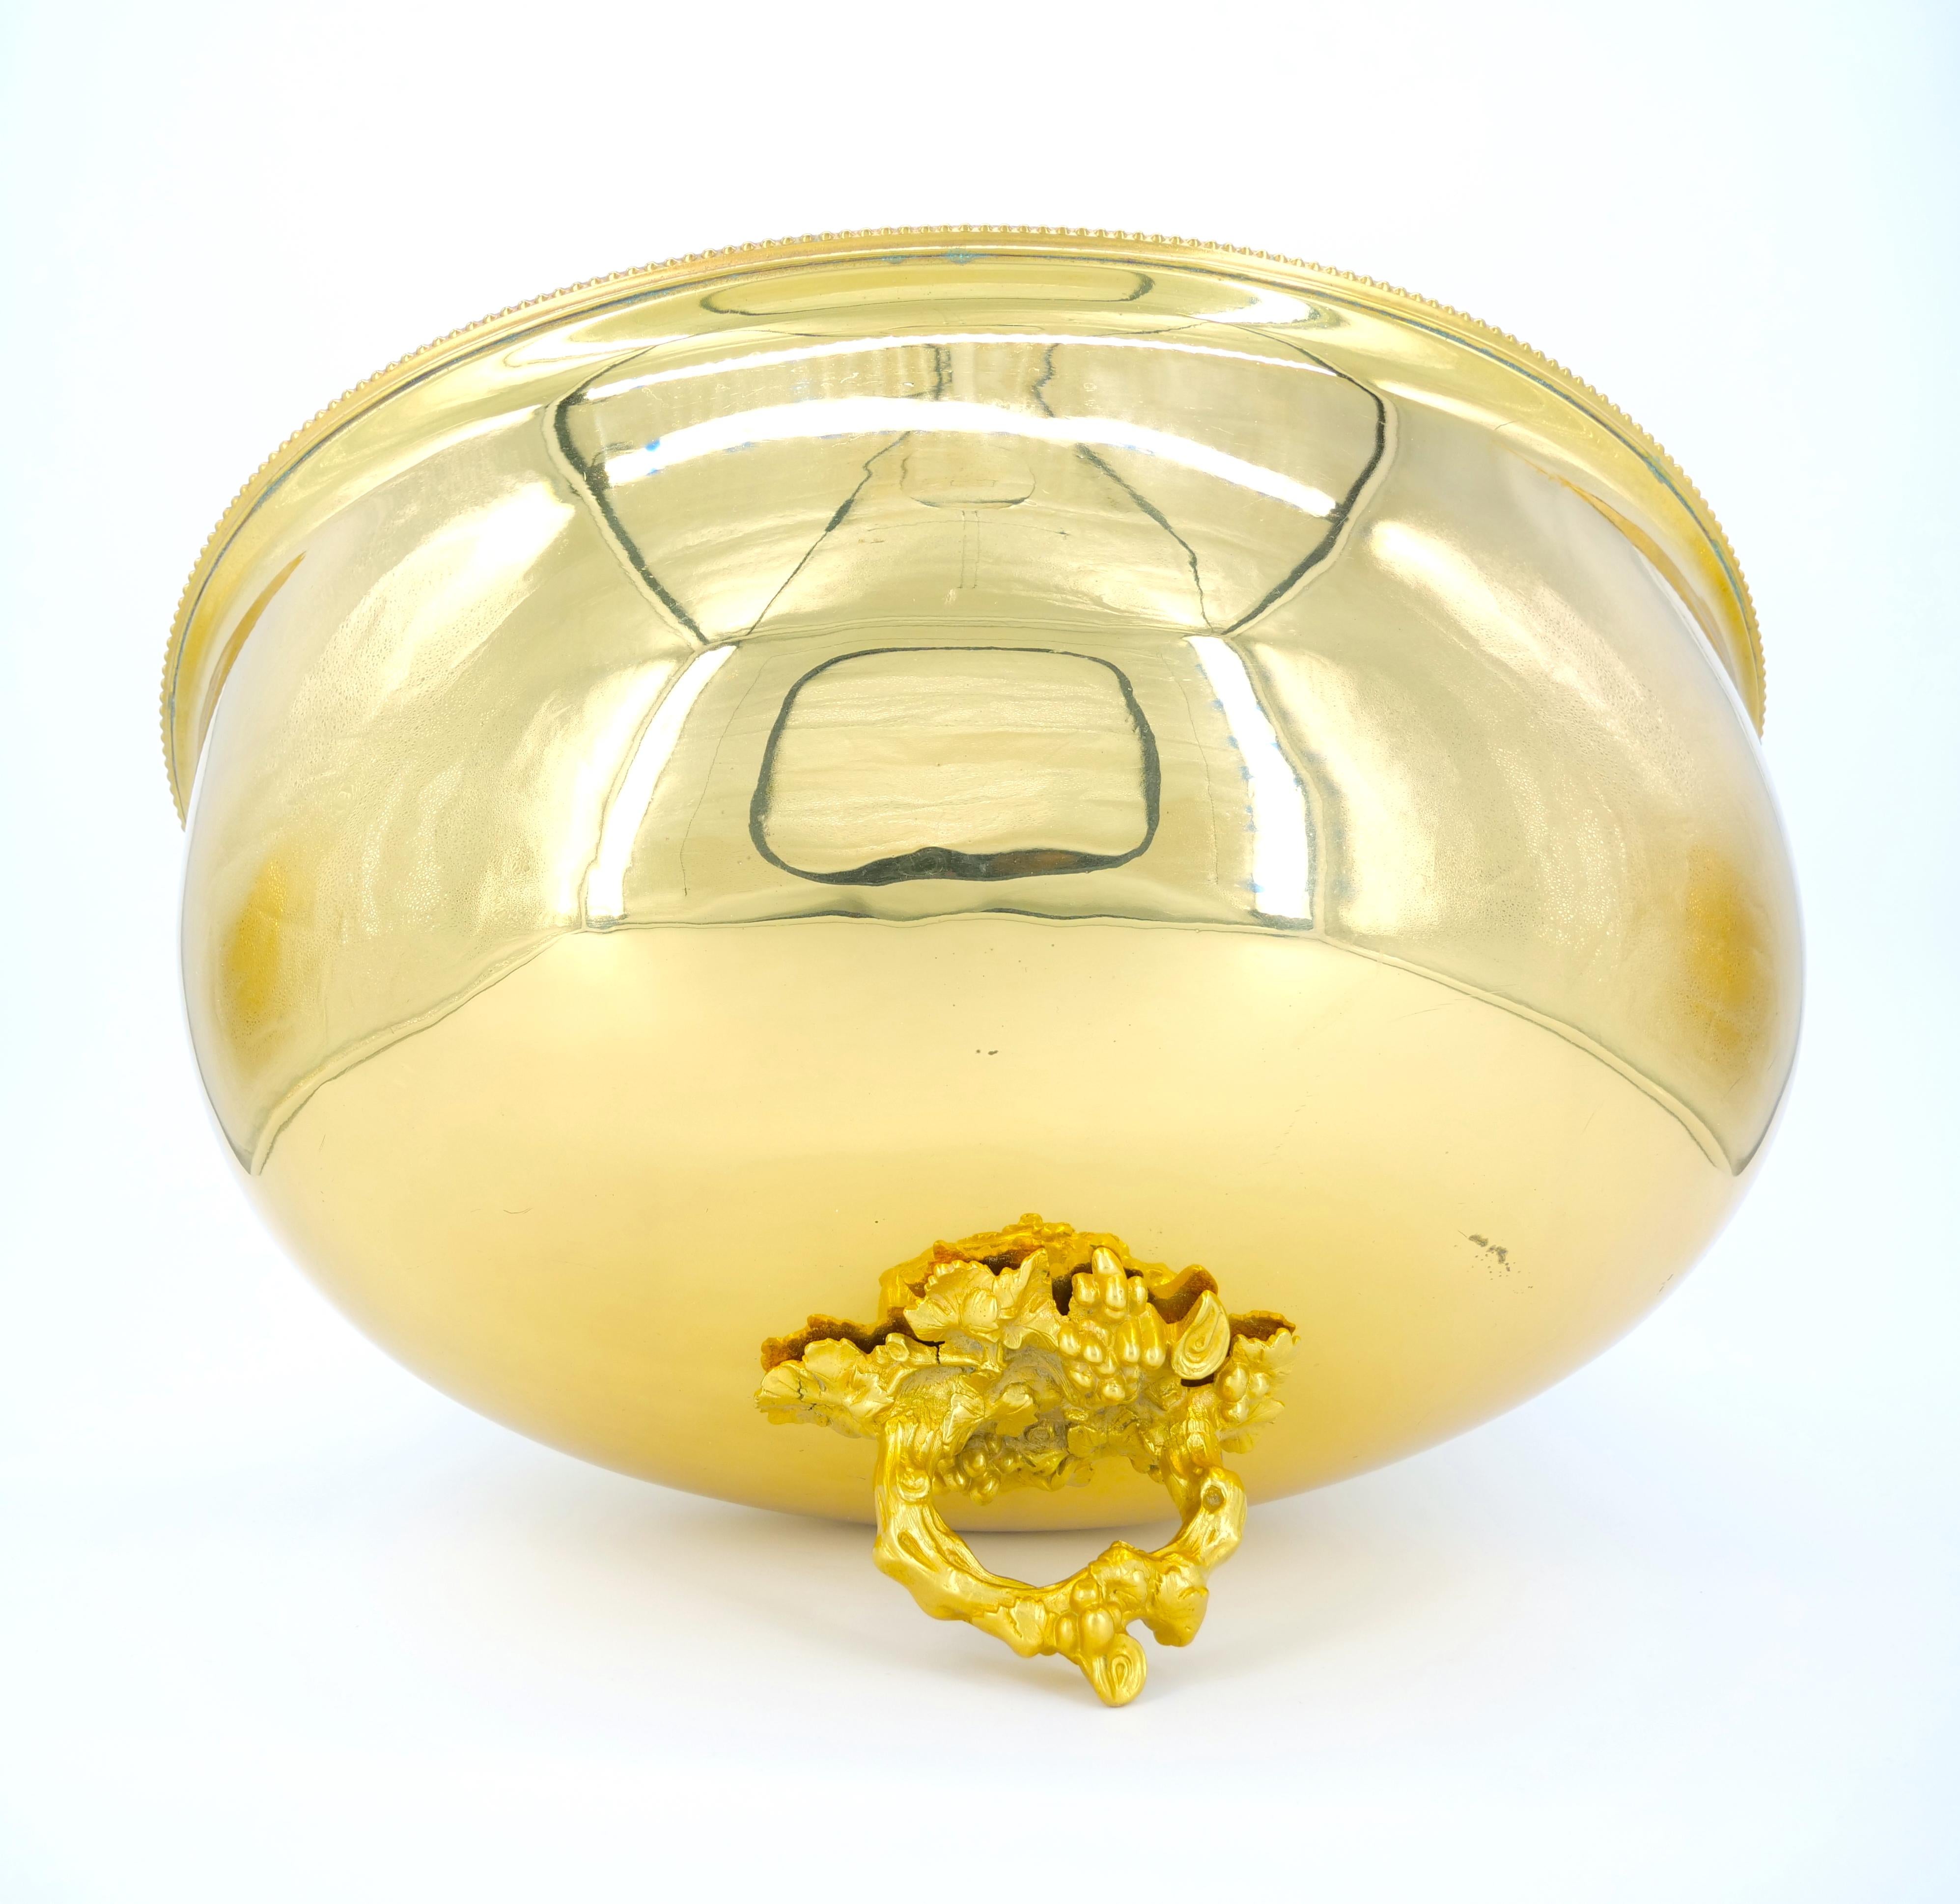 19th Century English Gilt Washed Silverplate Meat Dome by William Hutton & Sons For Sale 6